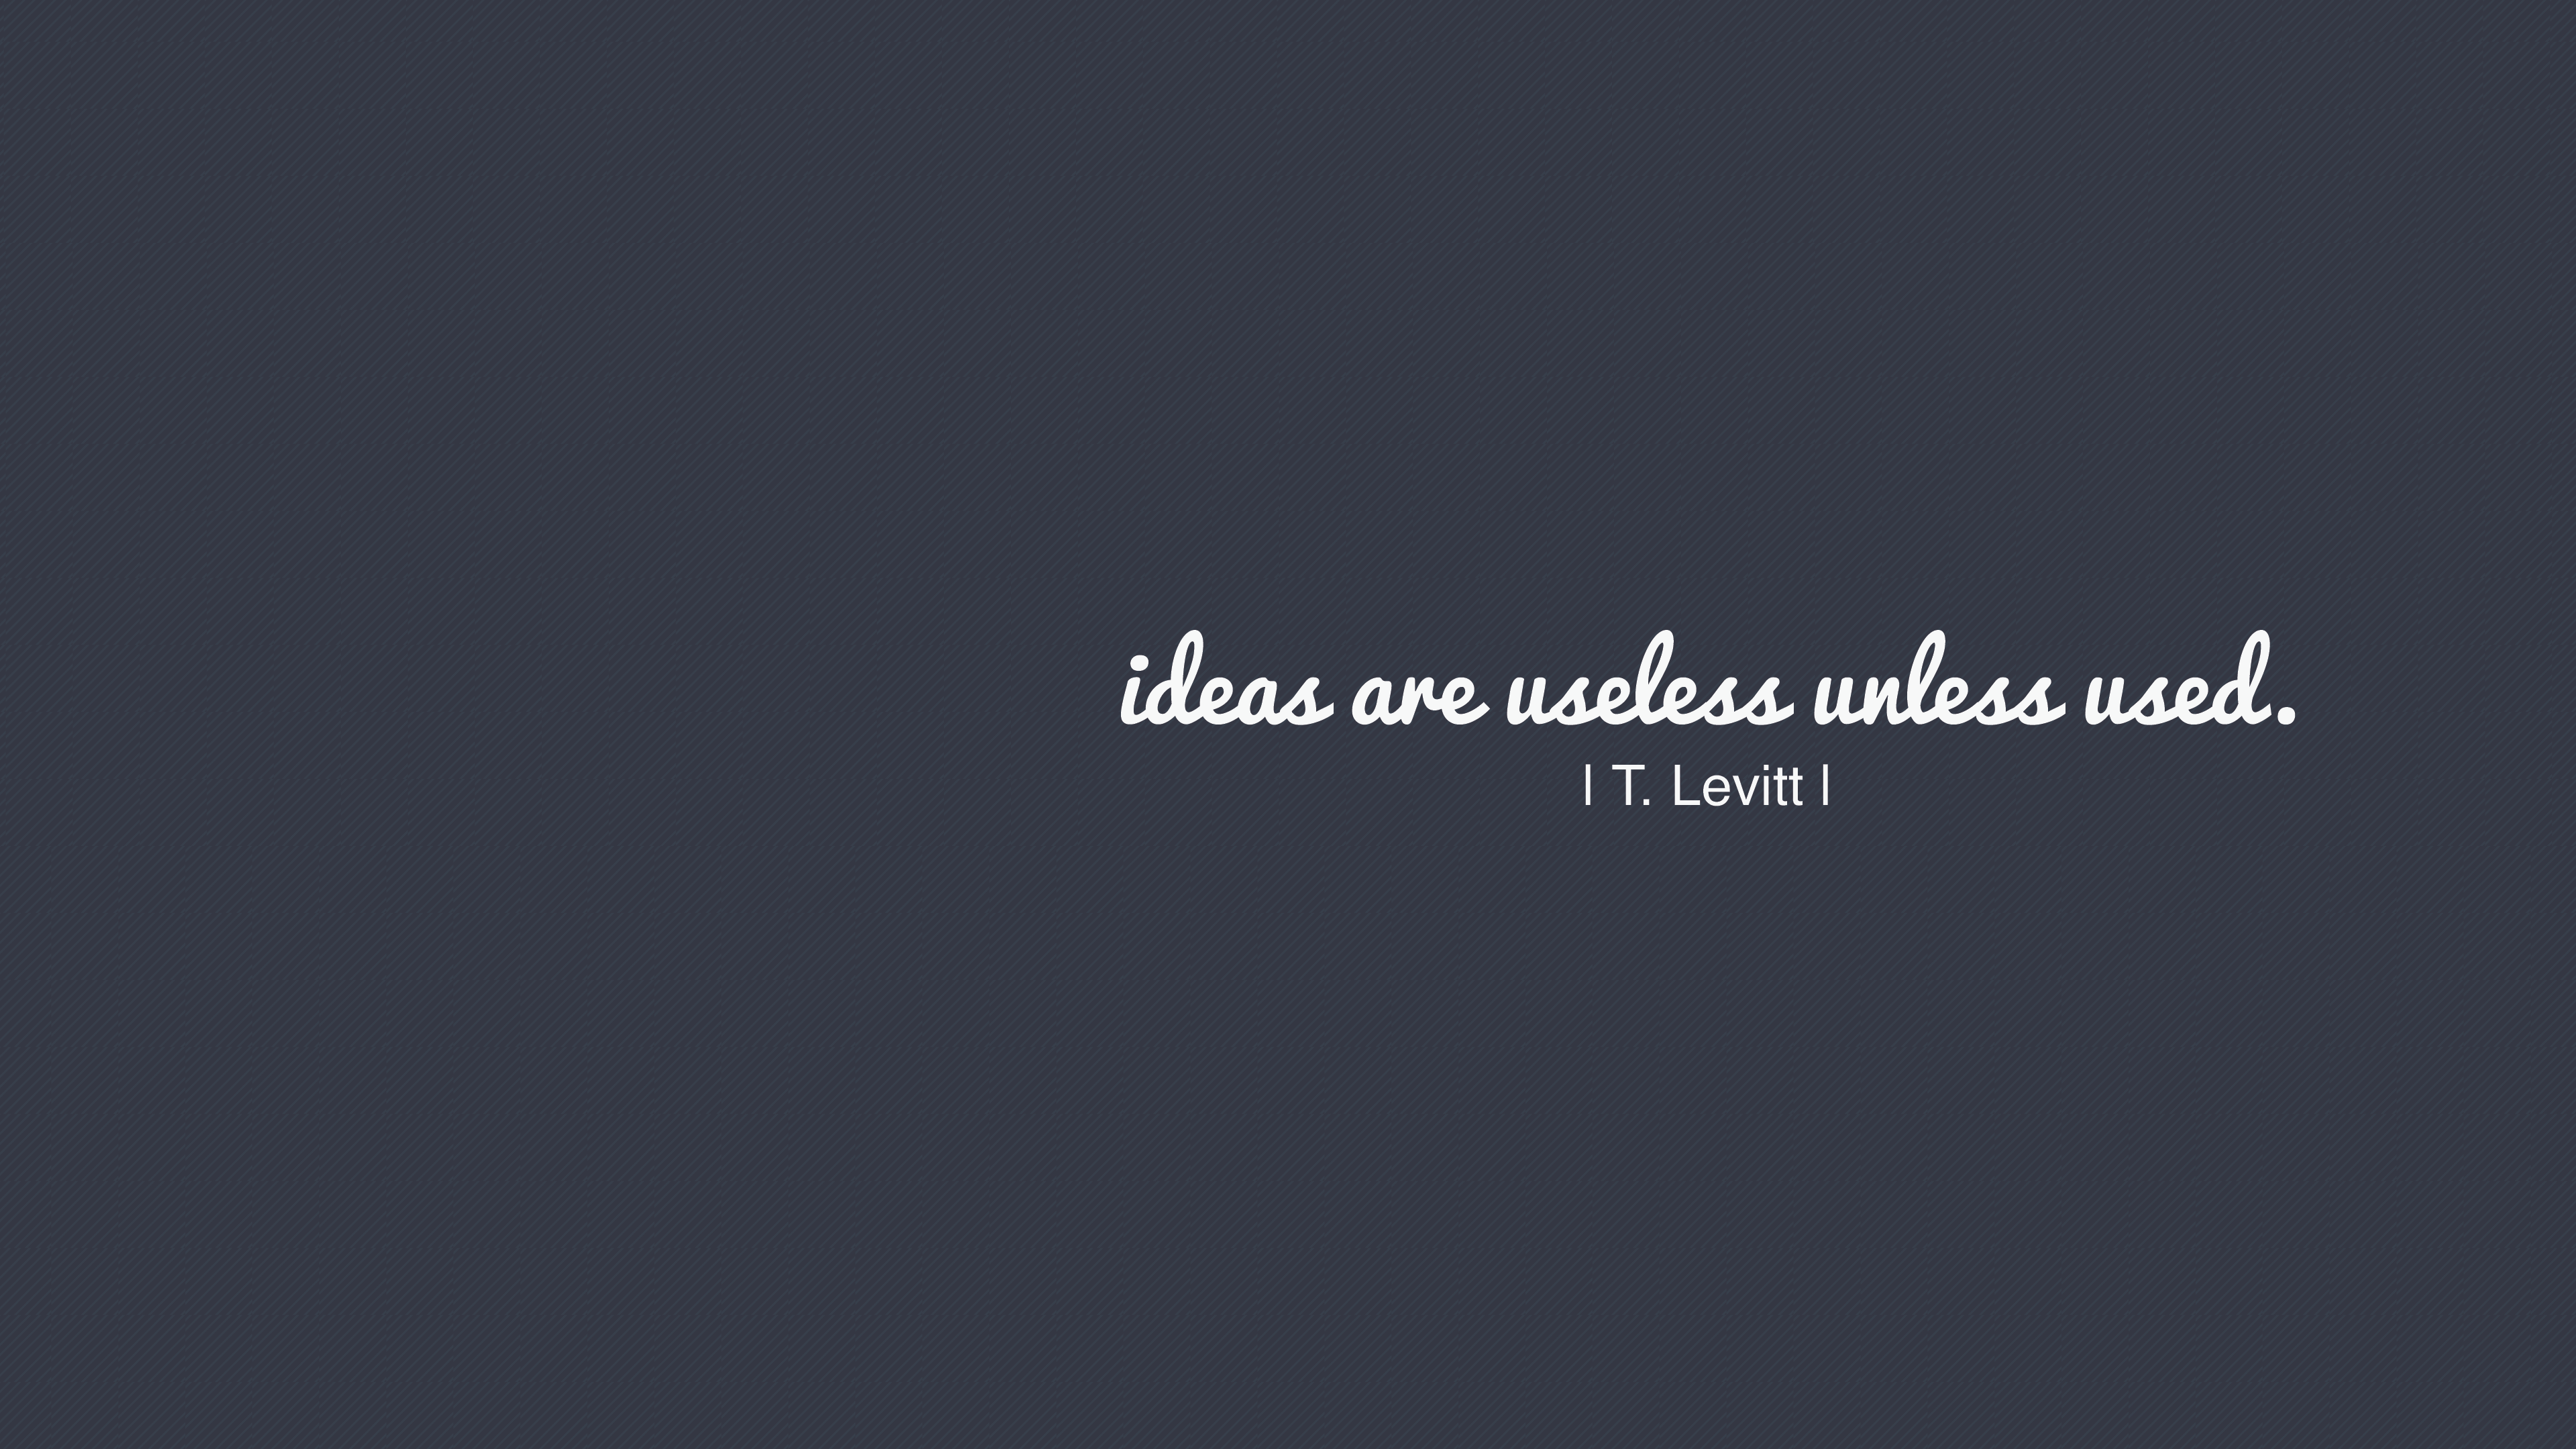 Minimalism Quotes Pictures Wallpapers